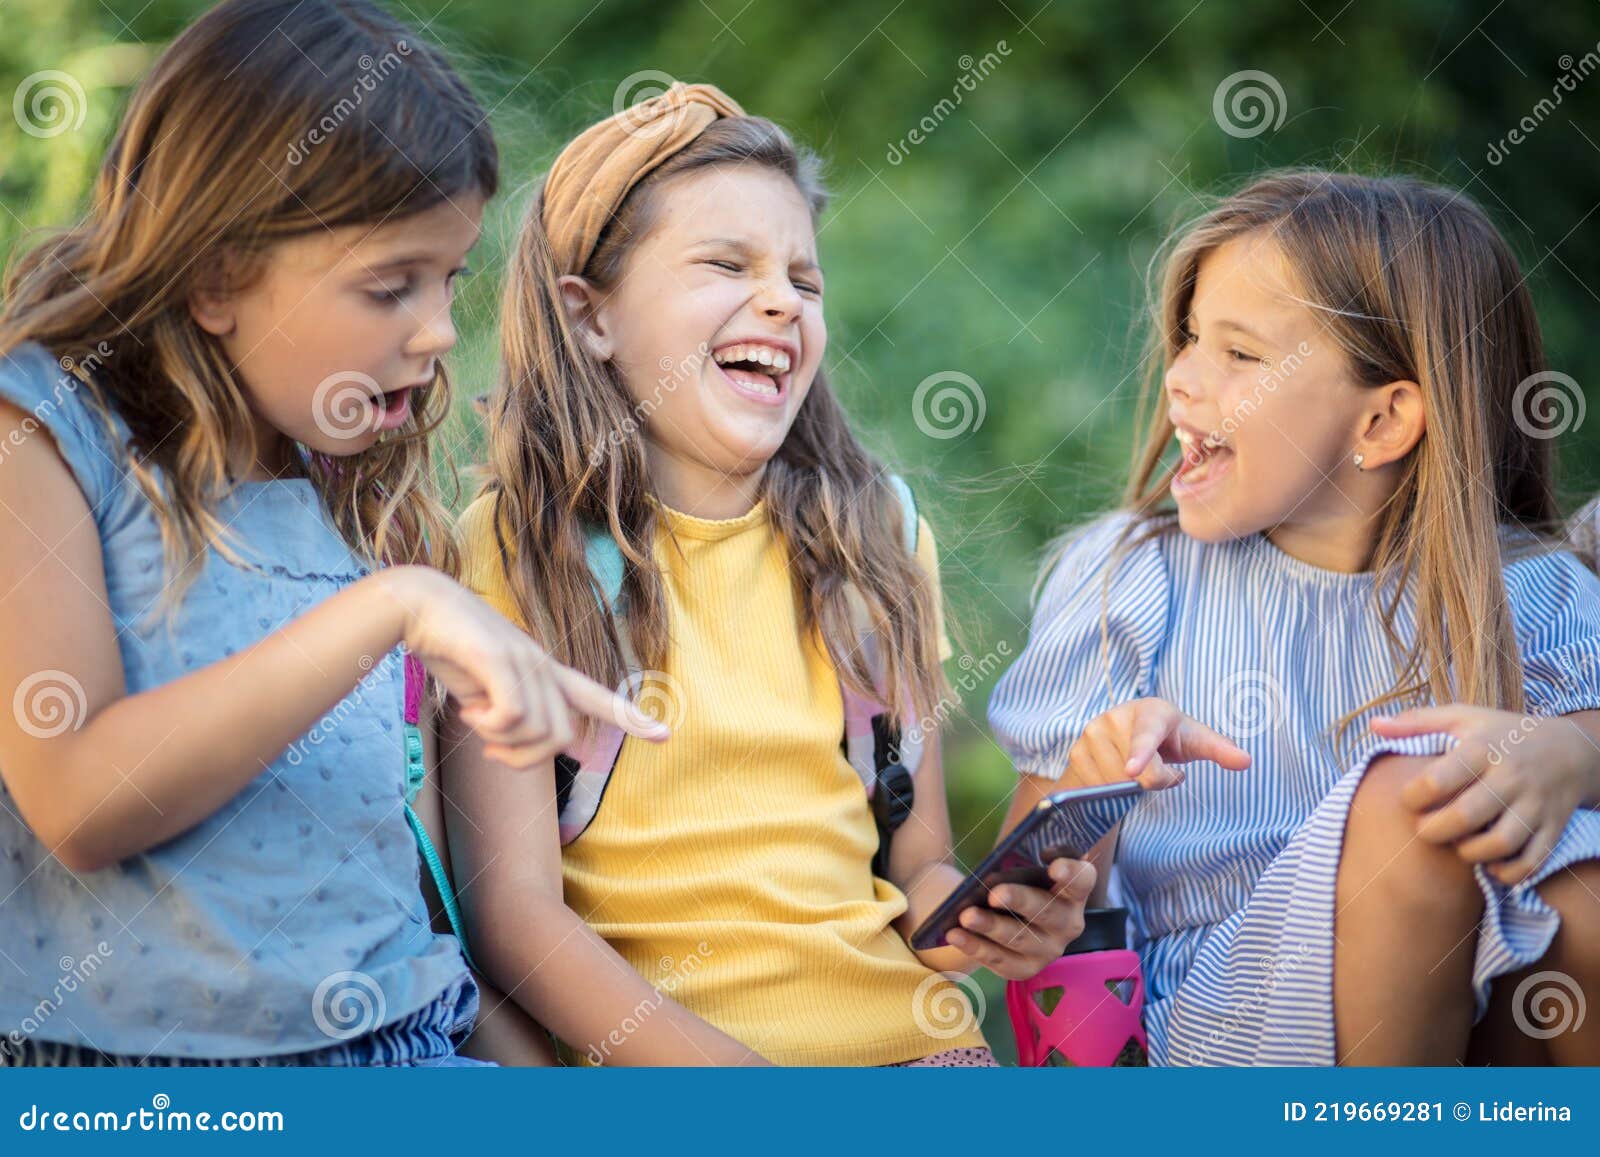 Funny Video. Three Little Girls Playing Outside Stock Image - Image of  ethnicity, nature: 219669281